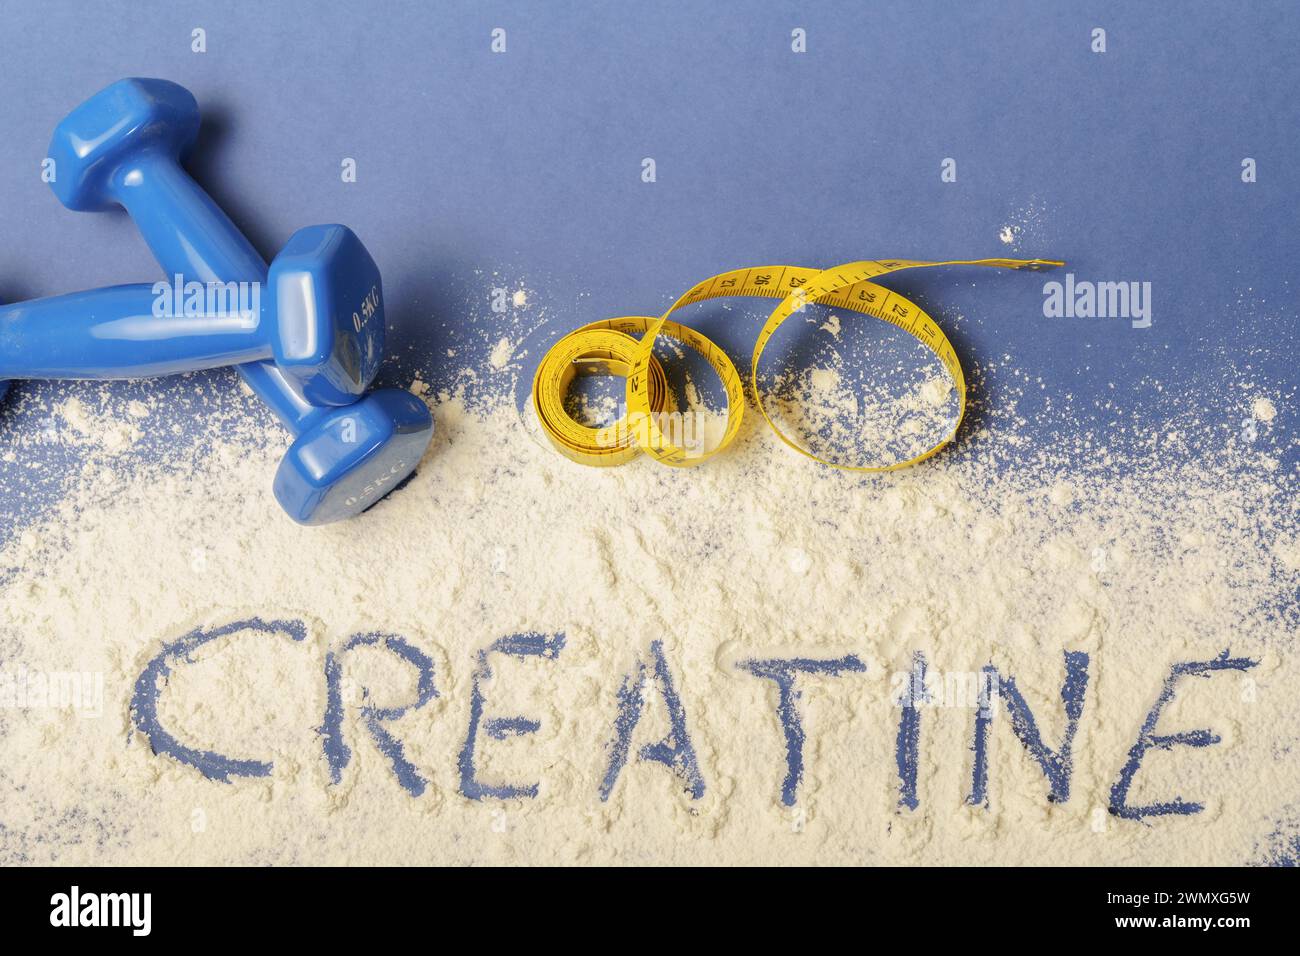 Word creatine written on creatine powder on blue background, with dumbbells and measuring tape Stock Photo